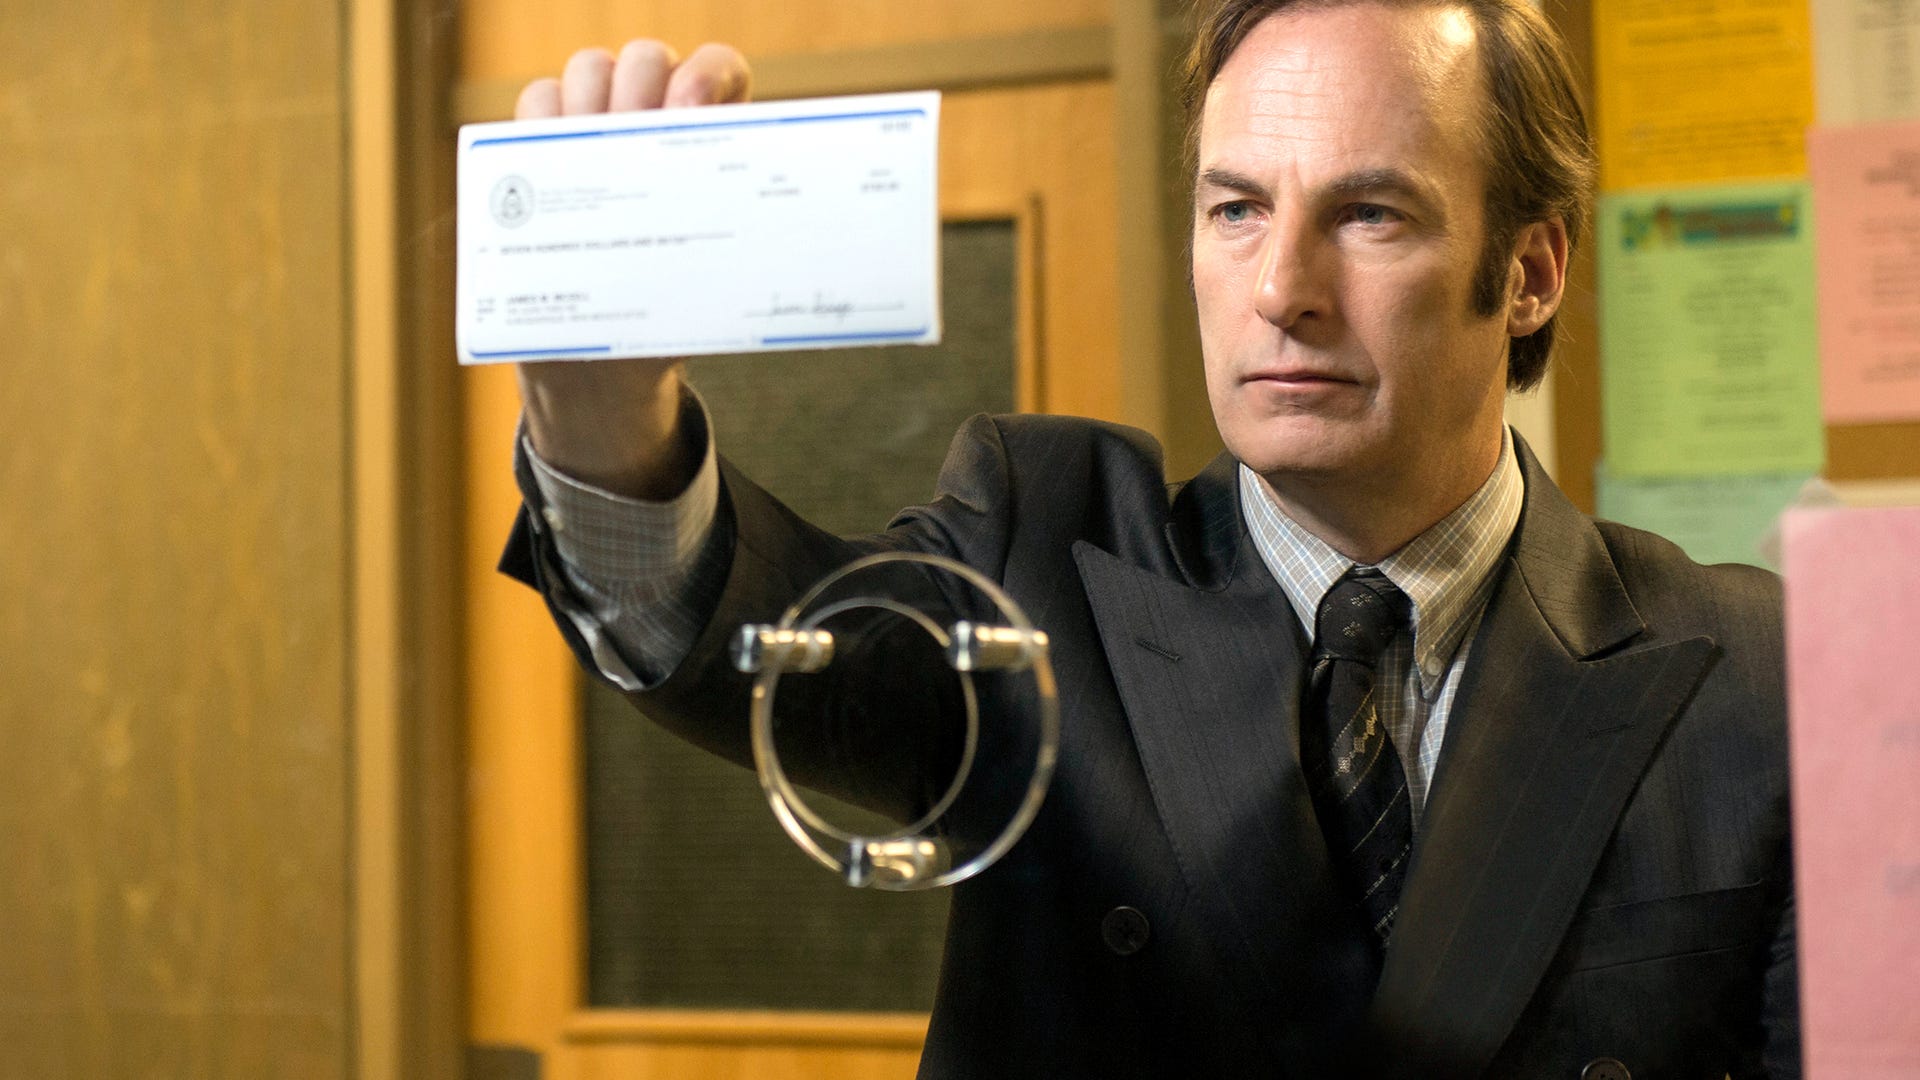 Gallery, 32 Reasons Why 2015 Is Going to Be Amazing, Better Call Saul